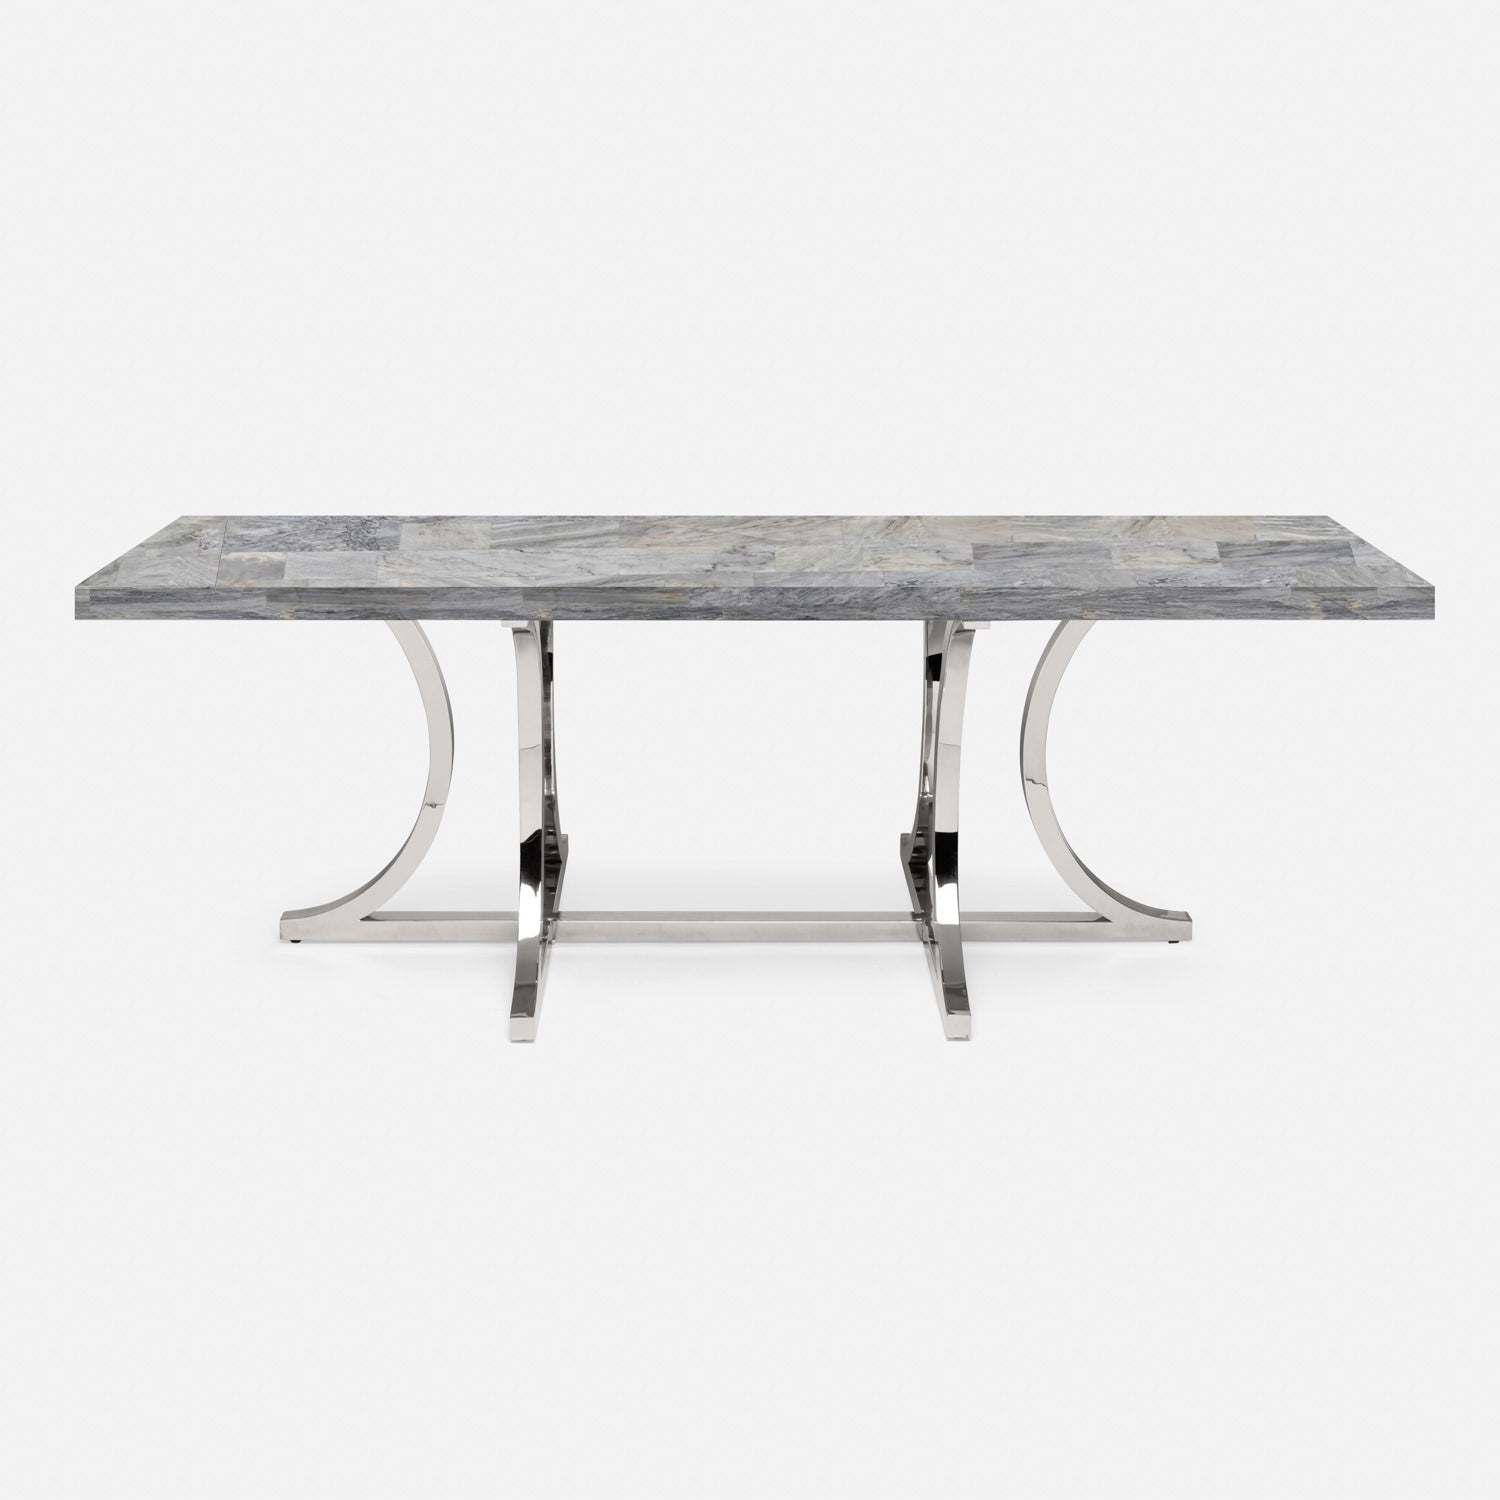 Made Goods Leighton 110" x 40" x 30" Polished Silver Steel Dinning Table With Rectangle Gray Romblon Stone Table Top